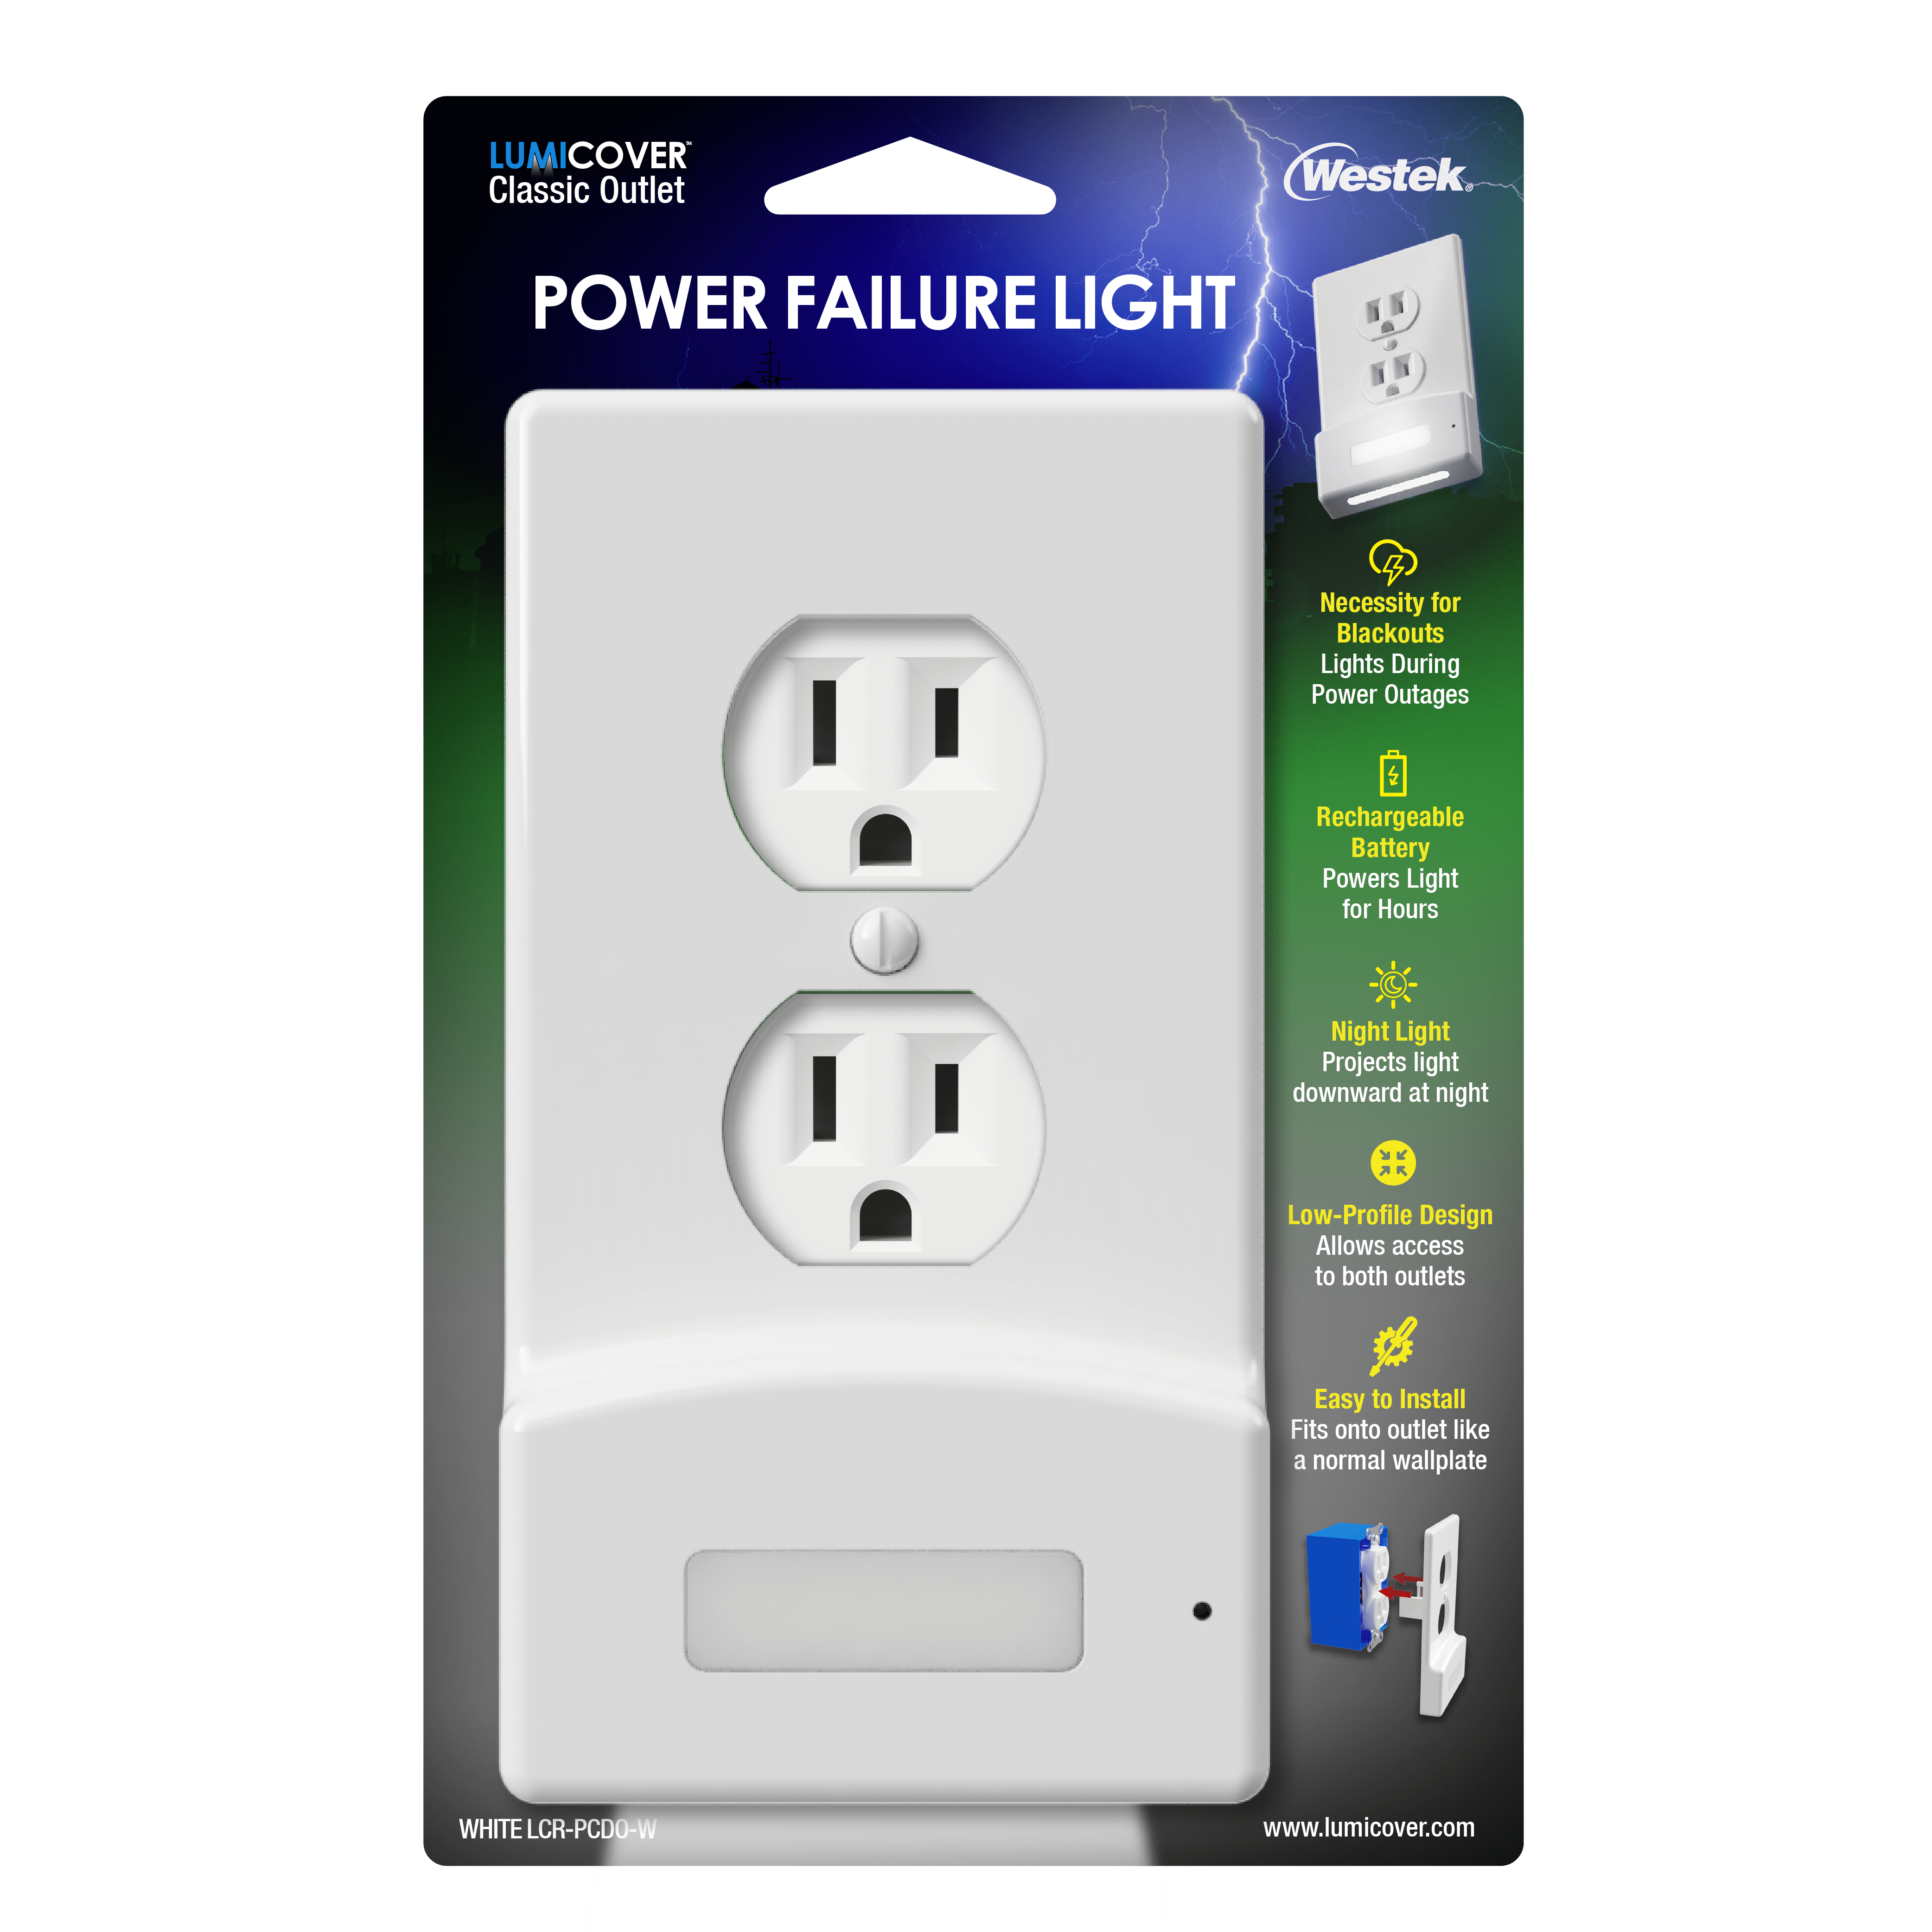 SNAP POWER SNAPPOWER NIGHTGUIDELIGHT STANDARD ELECTRICAL OUTLET PLUG COVER WHITE